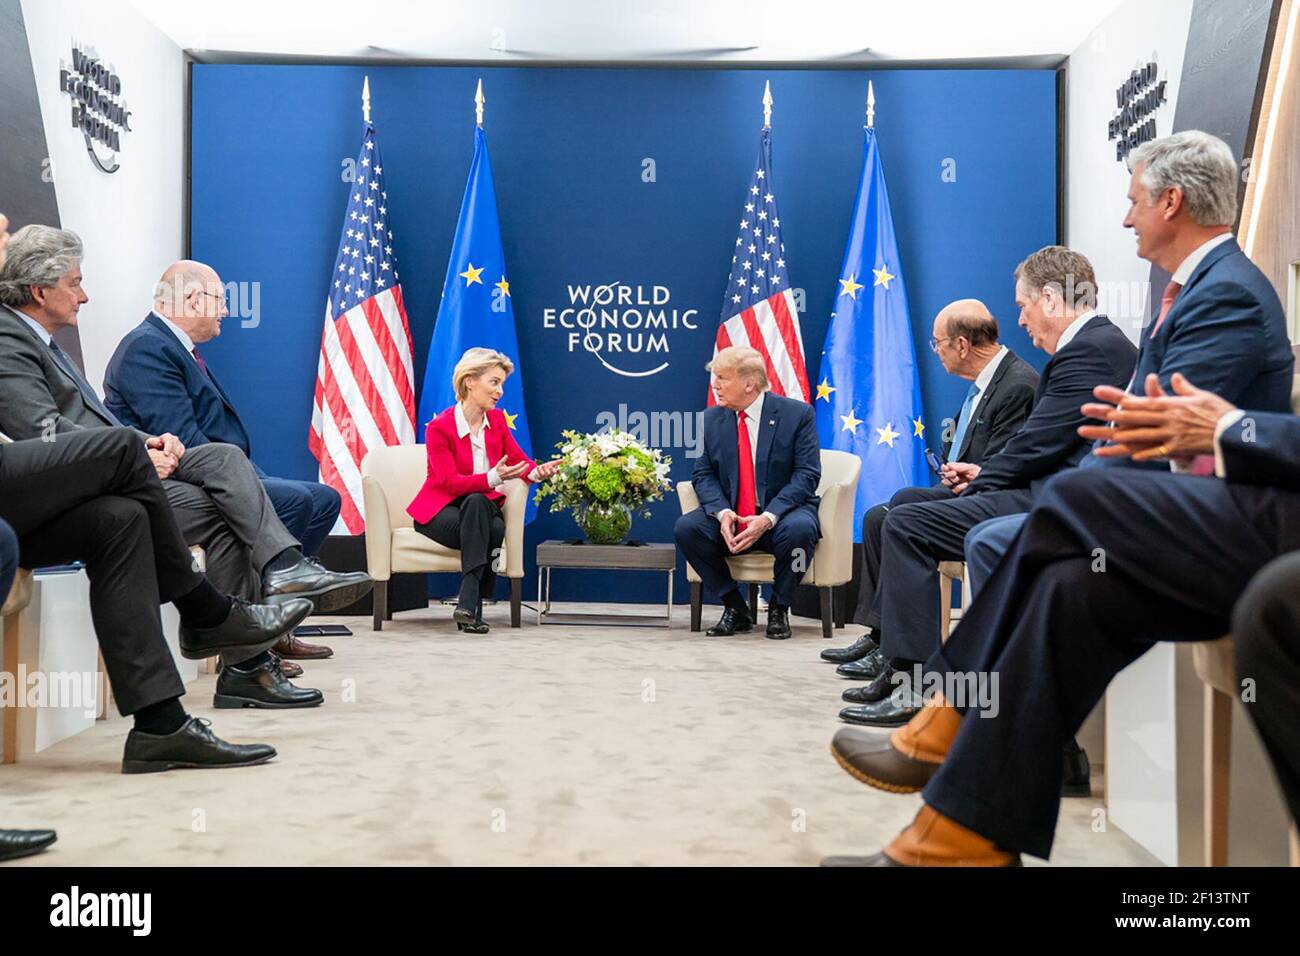 President Donald Trump joined by Secretary of Commerce Wilbur Ross United States Trade Representative Ambassador Robert Lighthizer and National Security Advisor Robert O'Brien meets with the President of the European Commission Ursula von der Leyen during the 50th Annual World Economic Forum meeting Tuesday Jan. 21 2020 at the Davos Congress Centre in Davos Switzerland. Stock Photo